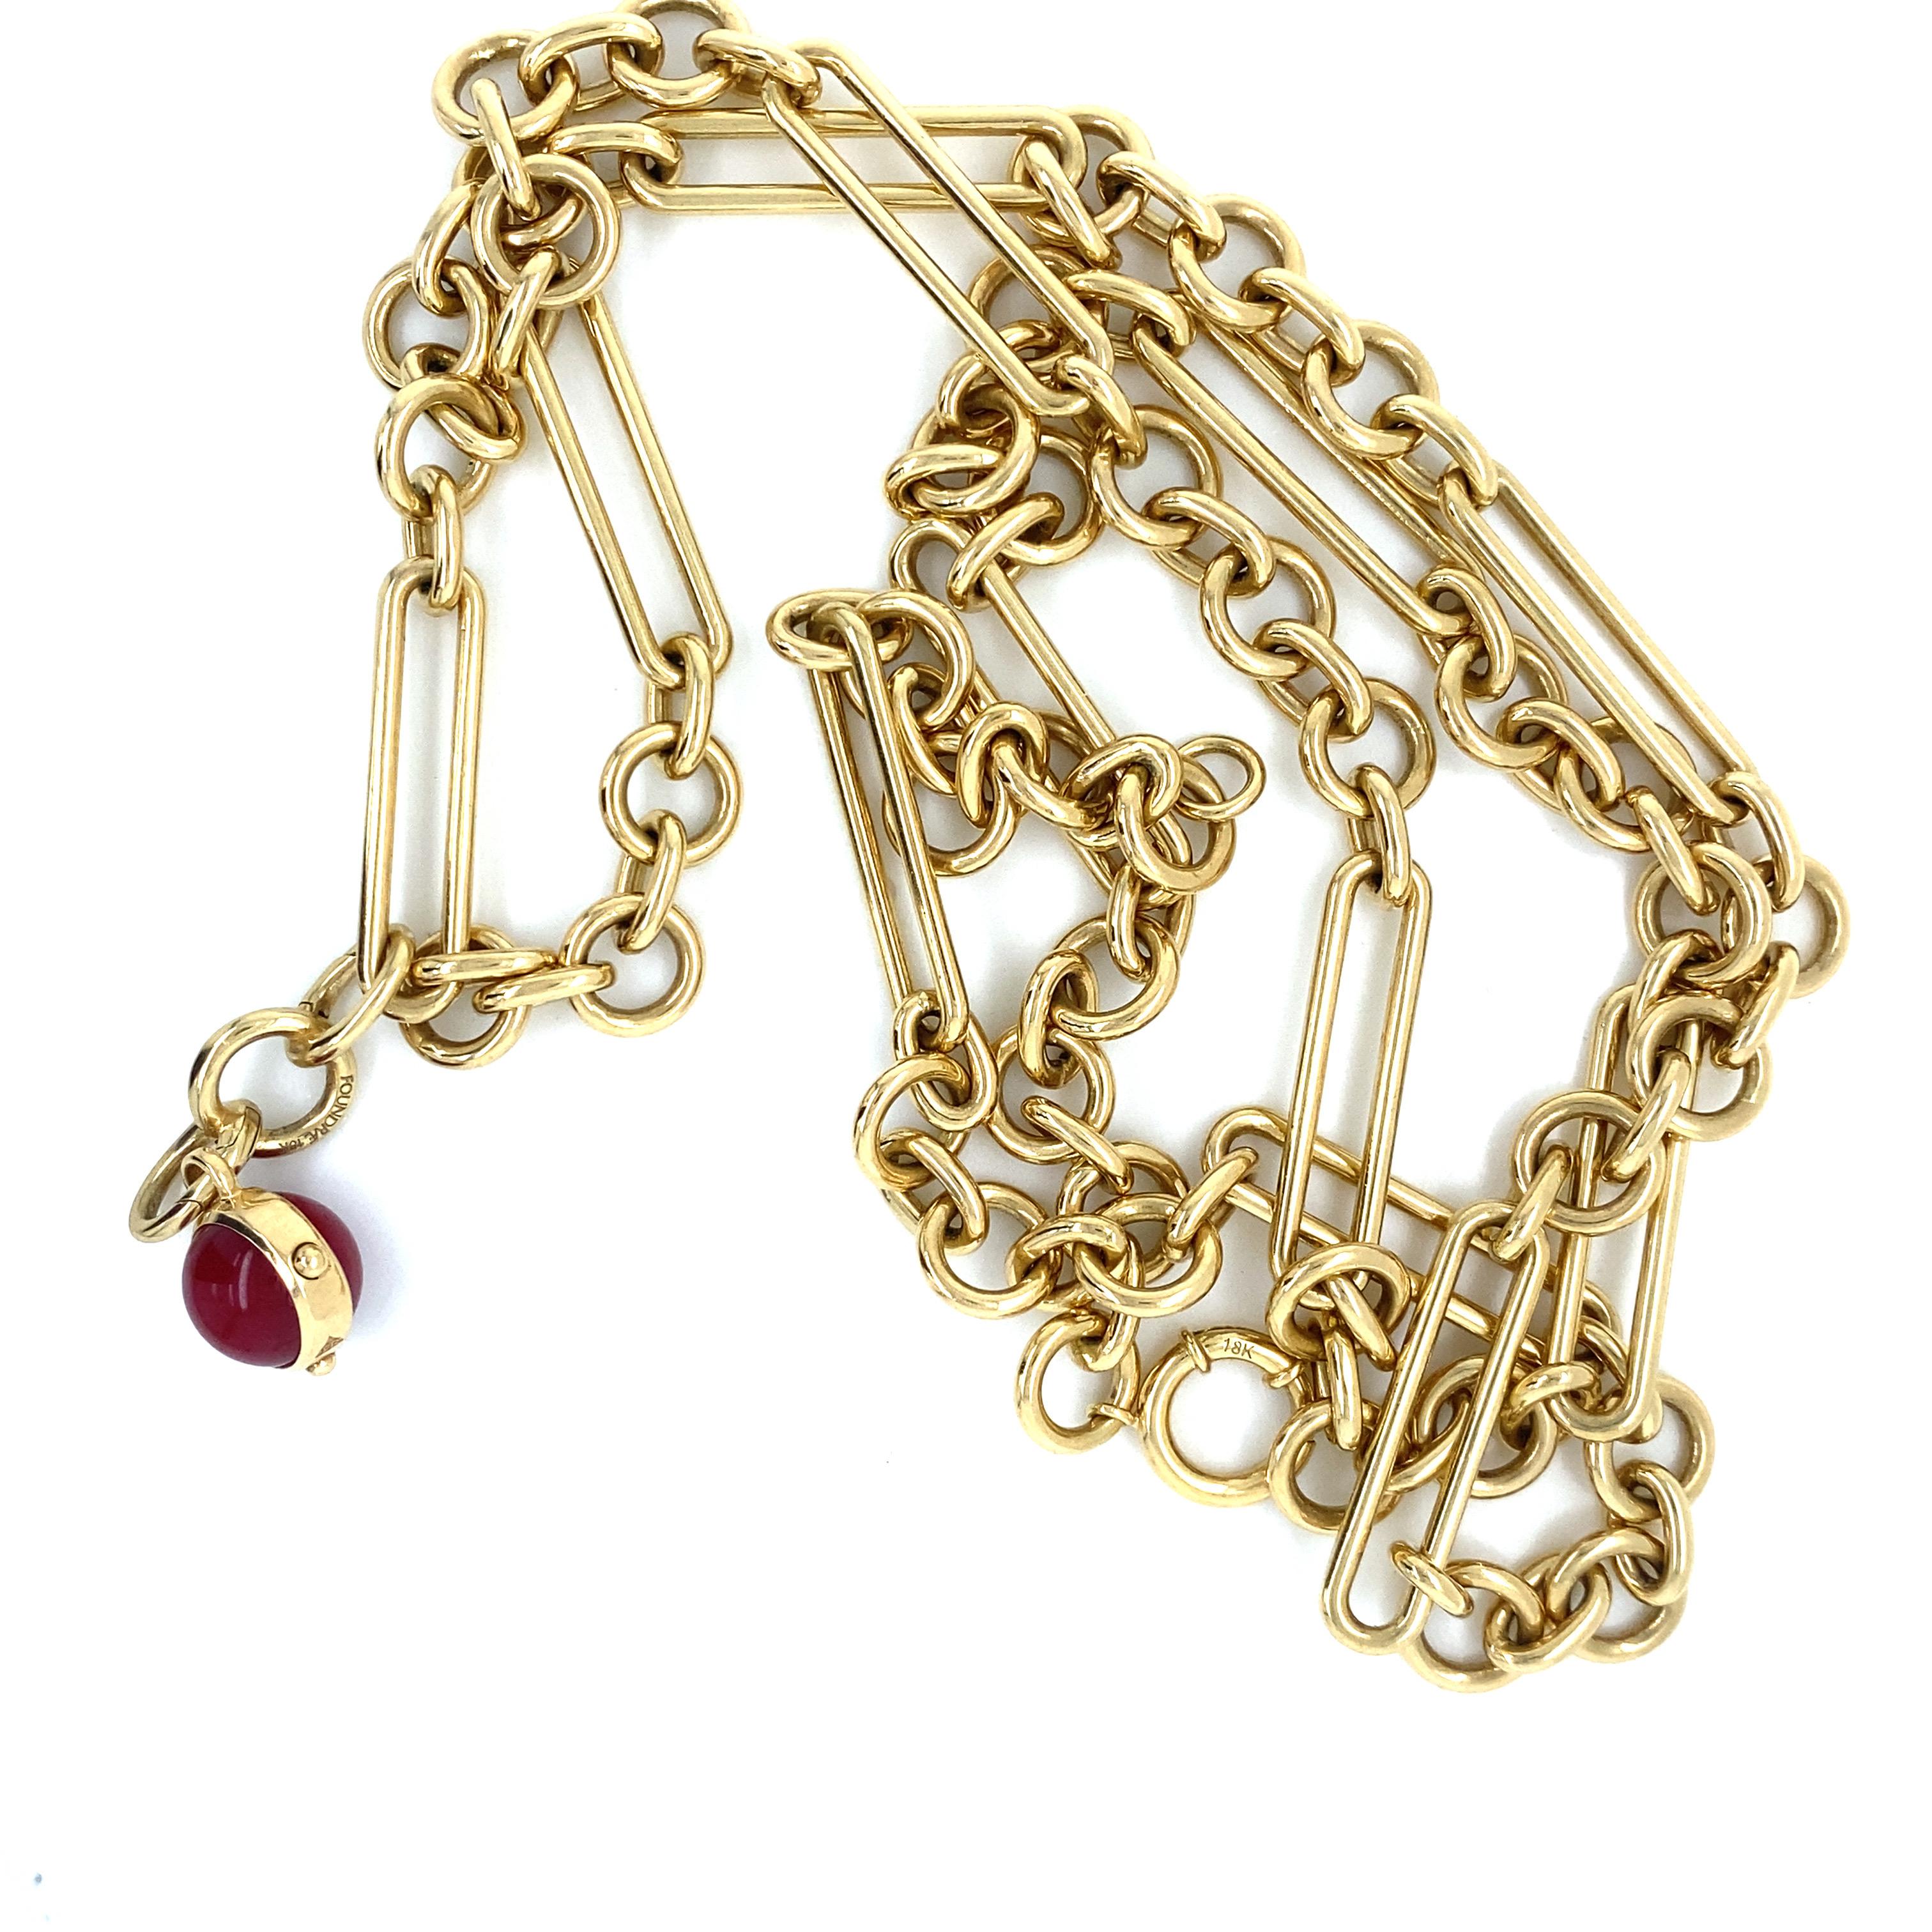 Foundrae Chain Link Necklace in 18K Yellow Gold.  The Necklace measures 32 inch in length. 104.66 grams. Signed. Includes Signed Ruby Charm.  Necklace Only.  Retails $21,585